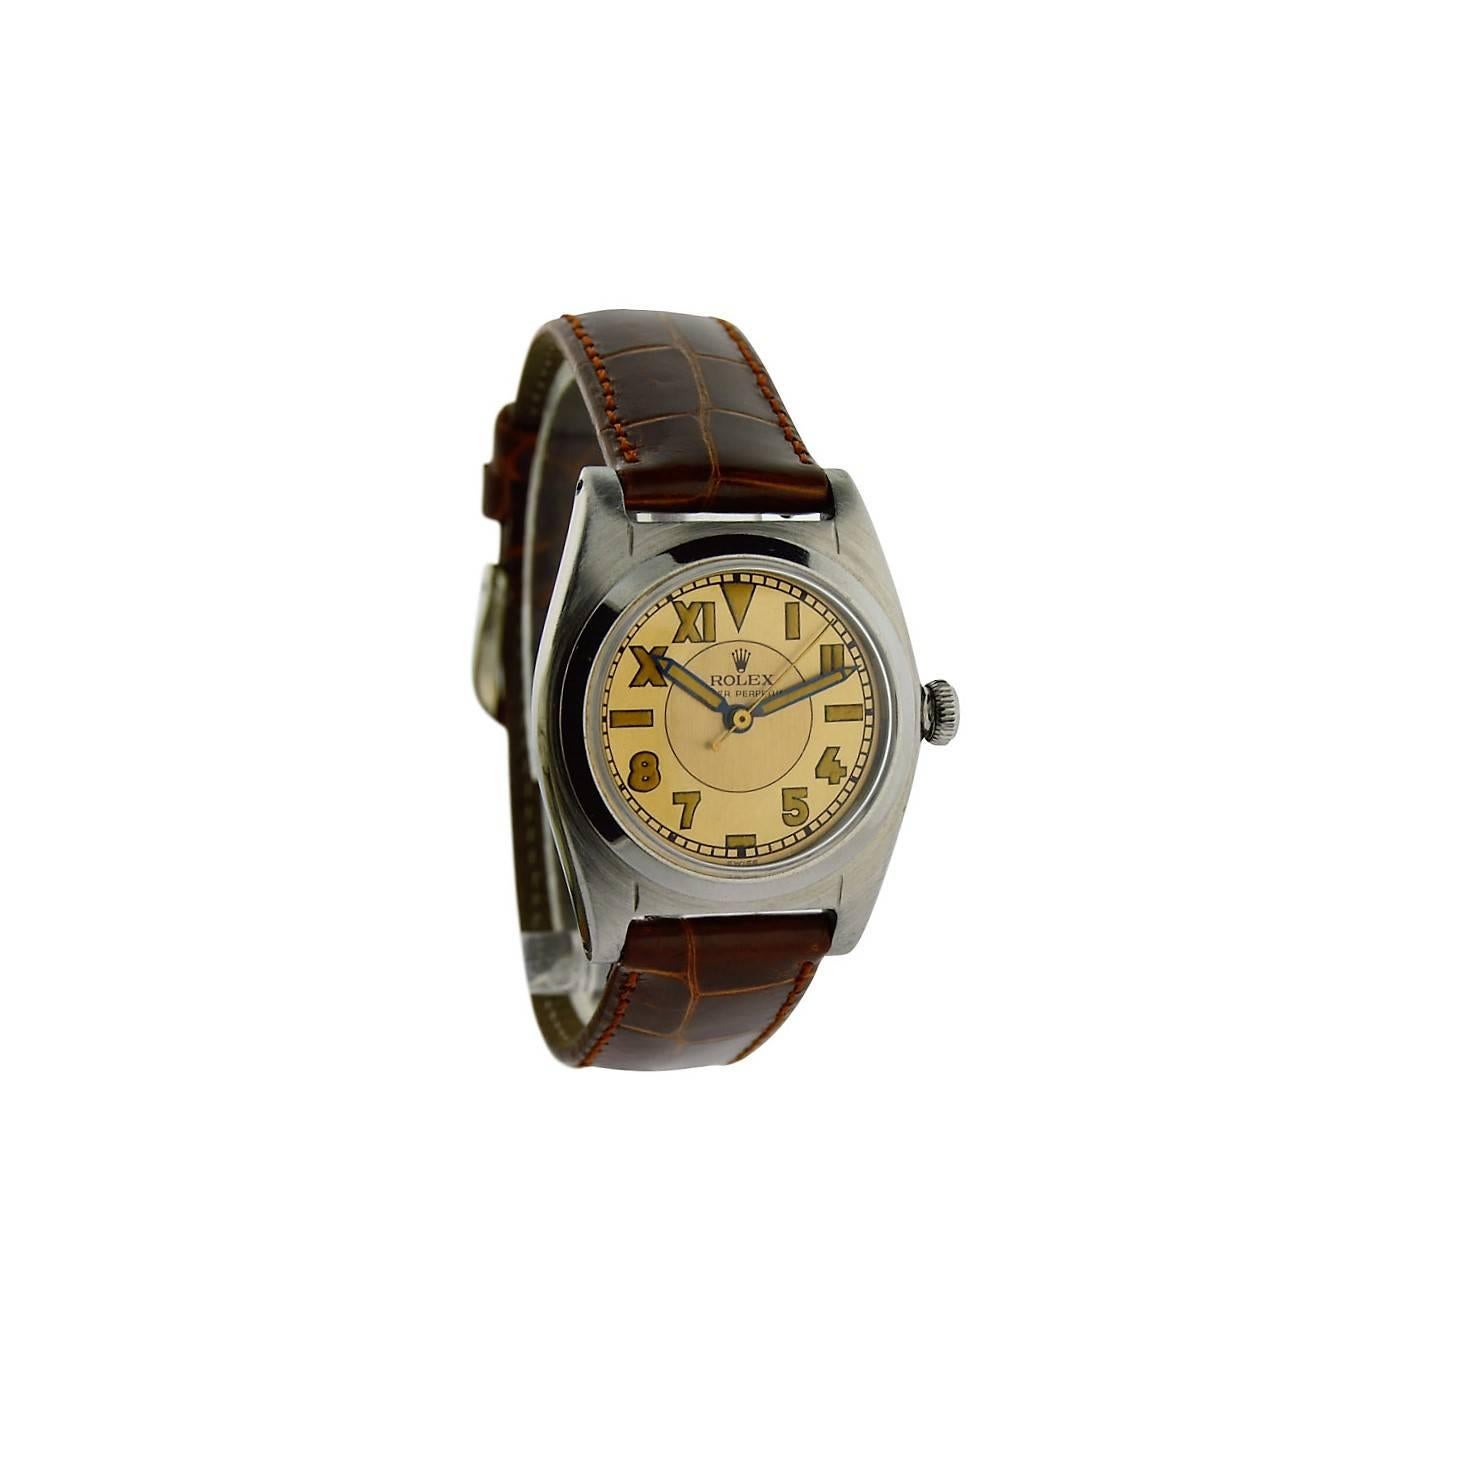 FACTORY / HOUSE: Rolex Watch Company
STYLE / REFERENCE: Bubble Back / Romabic
METAL / MATERIAL: Stainless Steel 
DIMENSIONS:  39mm  X  32mm
CIRCA: 1943-45
MOVEMENT / CALIBER: Perpetual Winding / 17 Jewels / Cal. N.A.
DIAL / HANDS: Romabic Two Tone